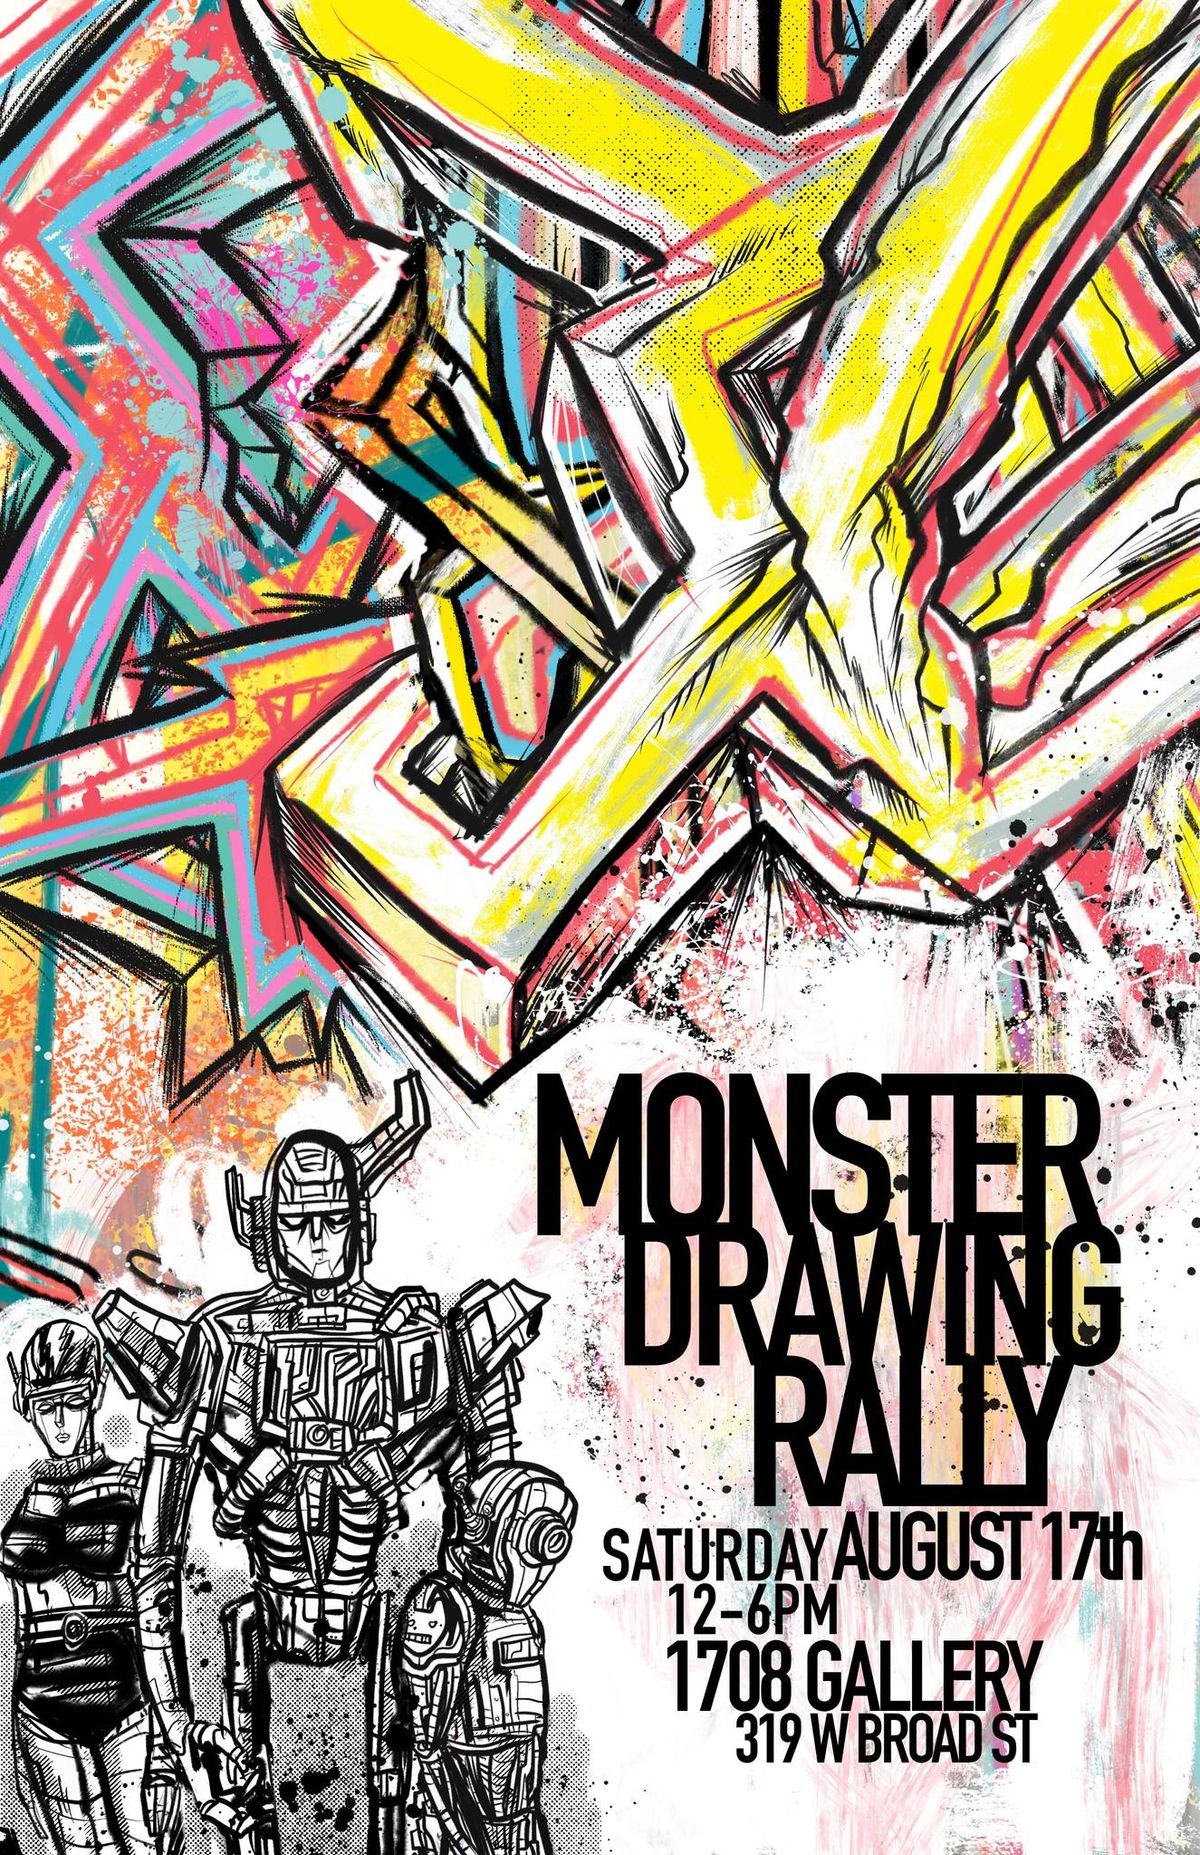 Monster Drawing Rally